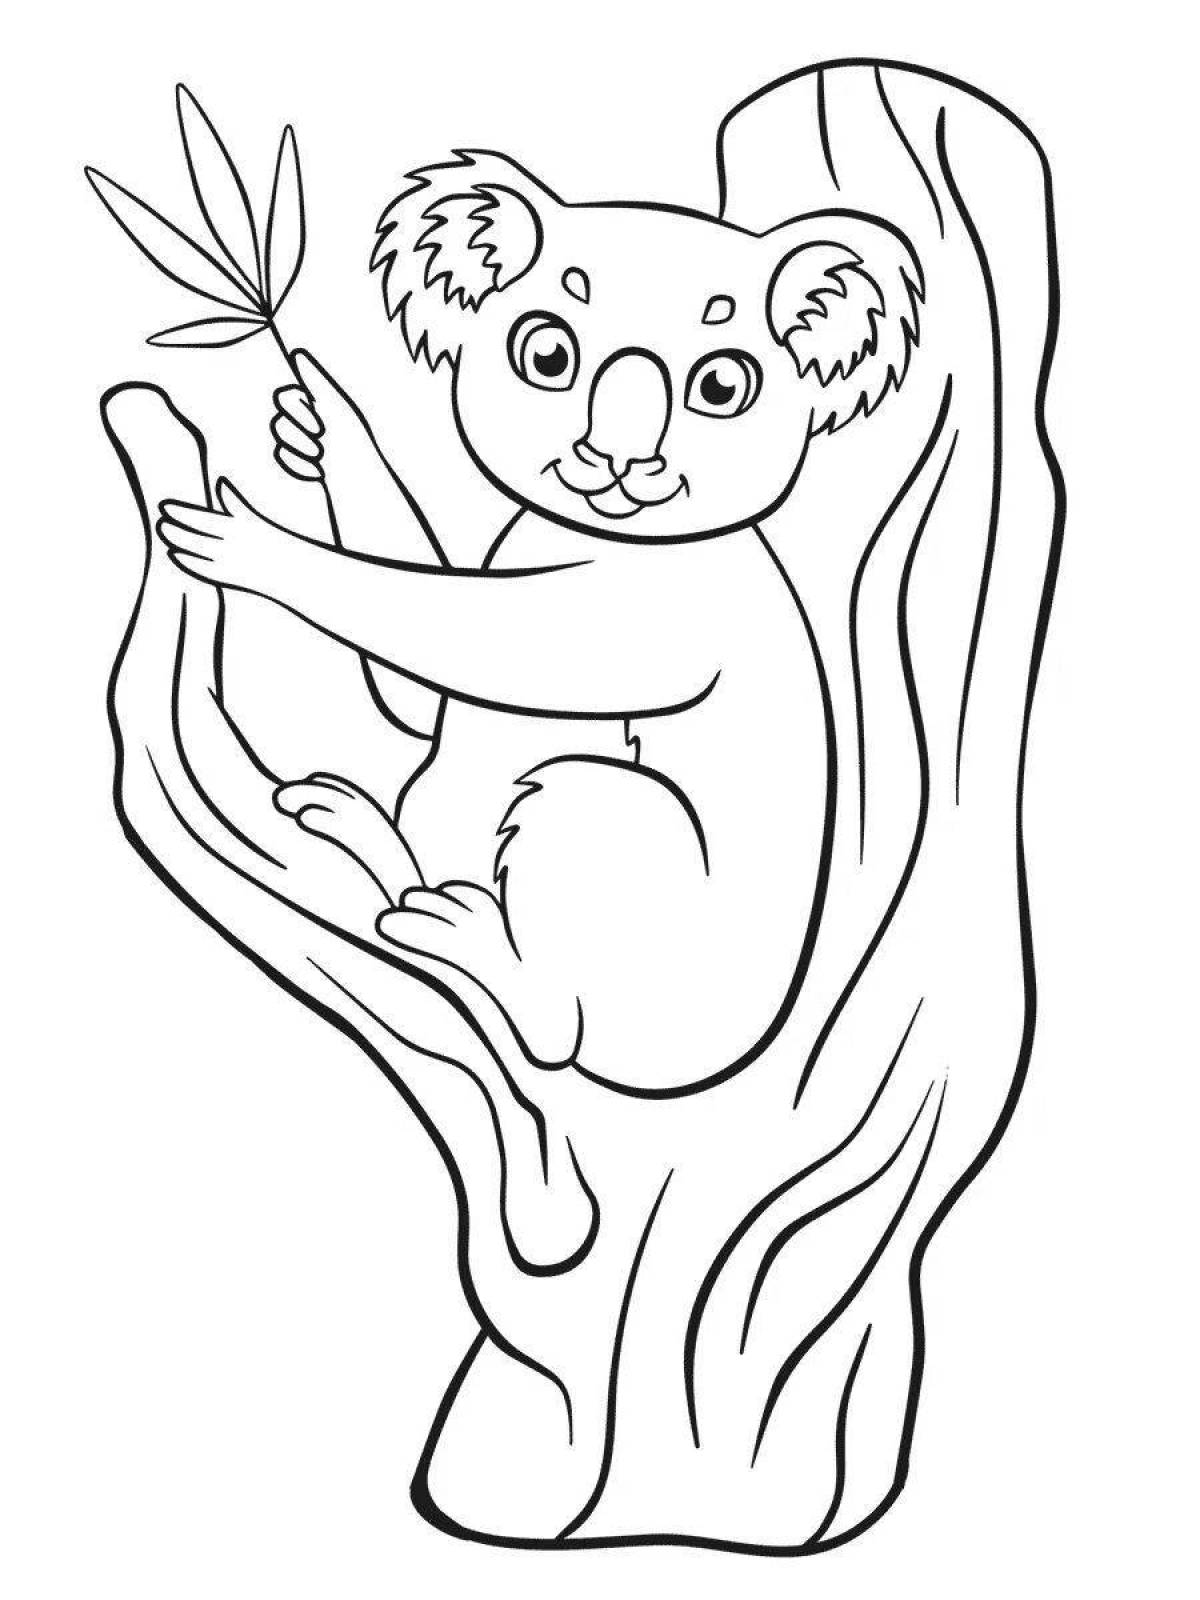 Exquisite eucalyptus coloring page